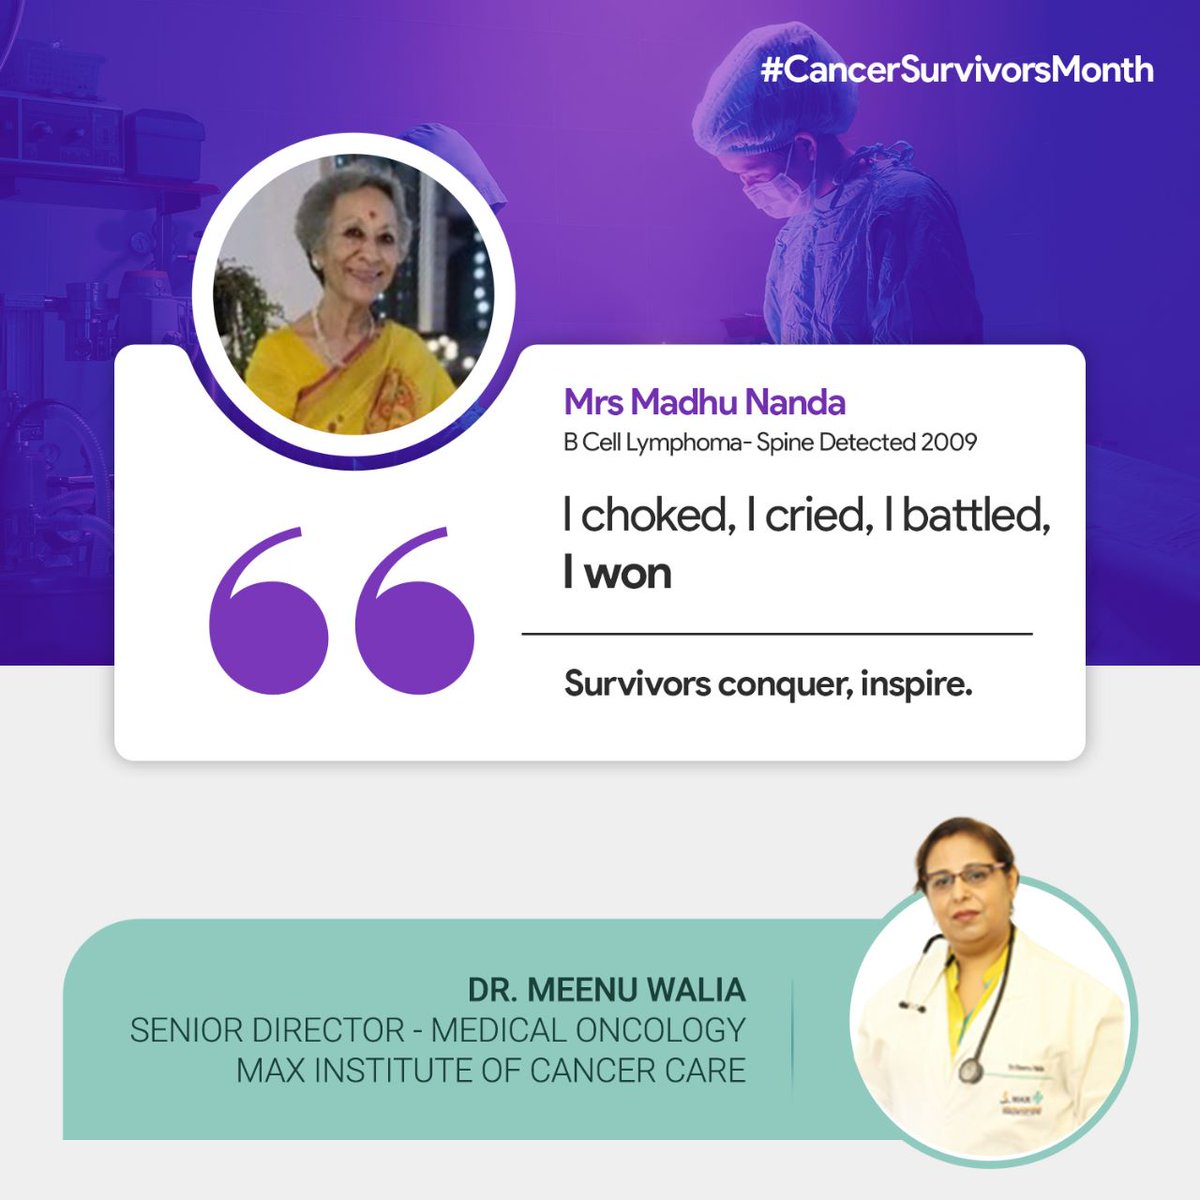 Witnessing the unwavering strength of this extraordinary survivor, we are reminded that even amidst the toughest battles, victory is possible.

#CancerSurvivor #VictoryOverAdversity #DrMeenuWalia #CareForCancer #CancerSurvivorMonth #CancerSurvivors #CancerSpecialist